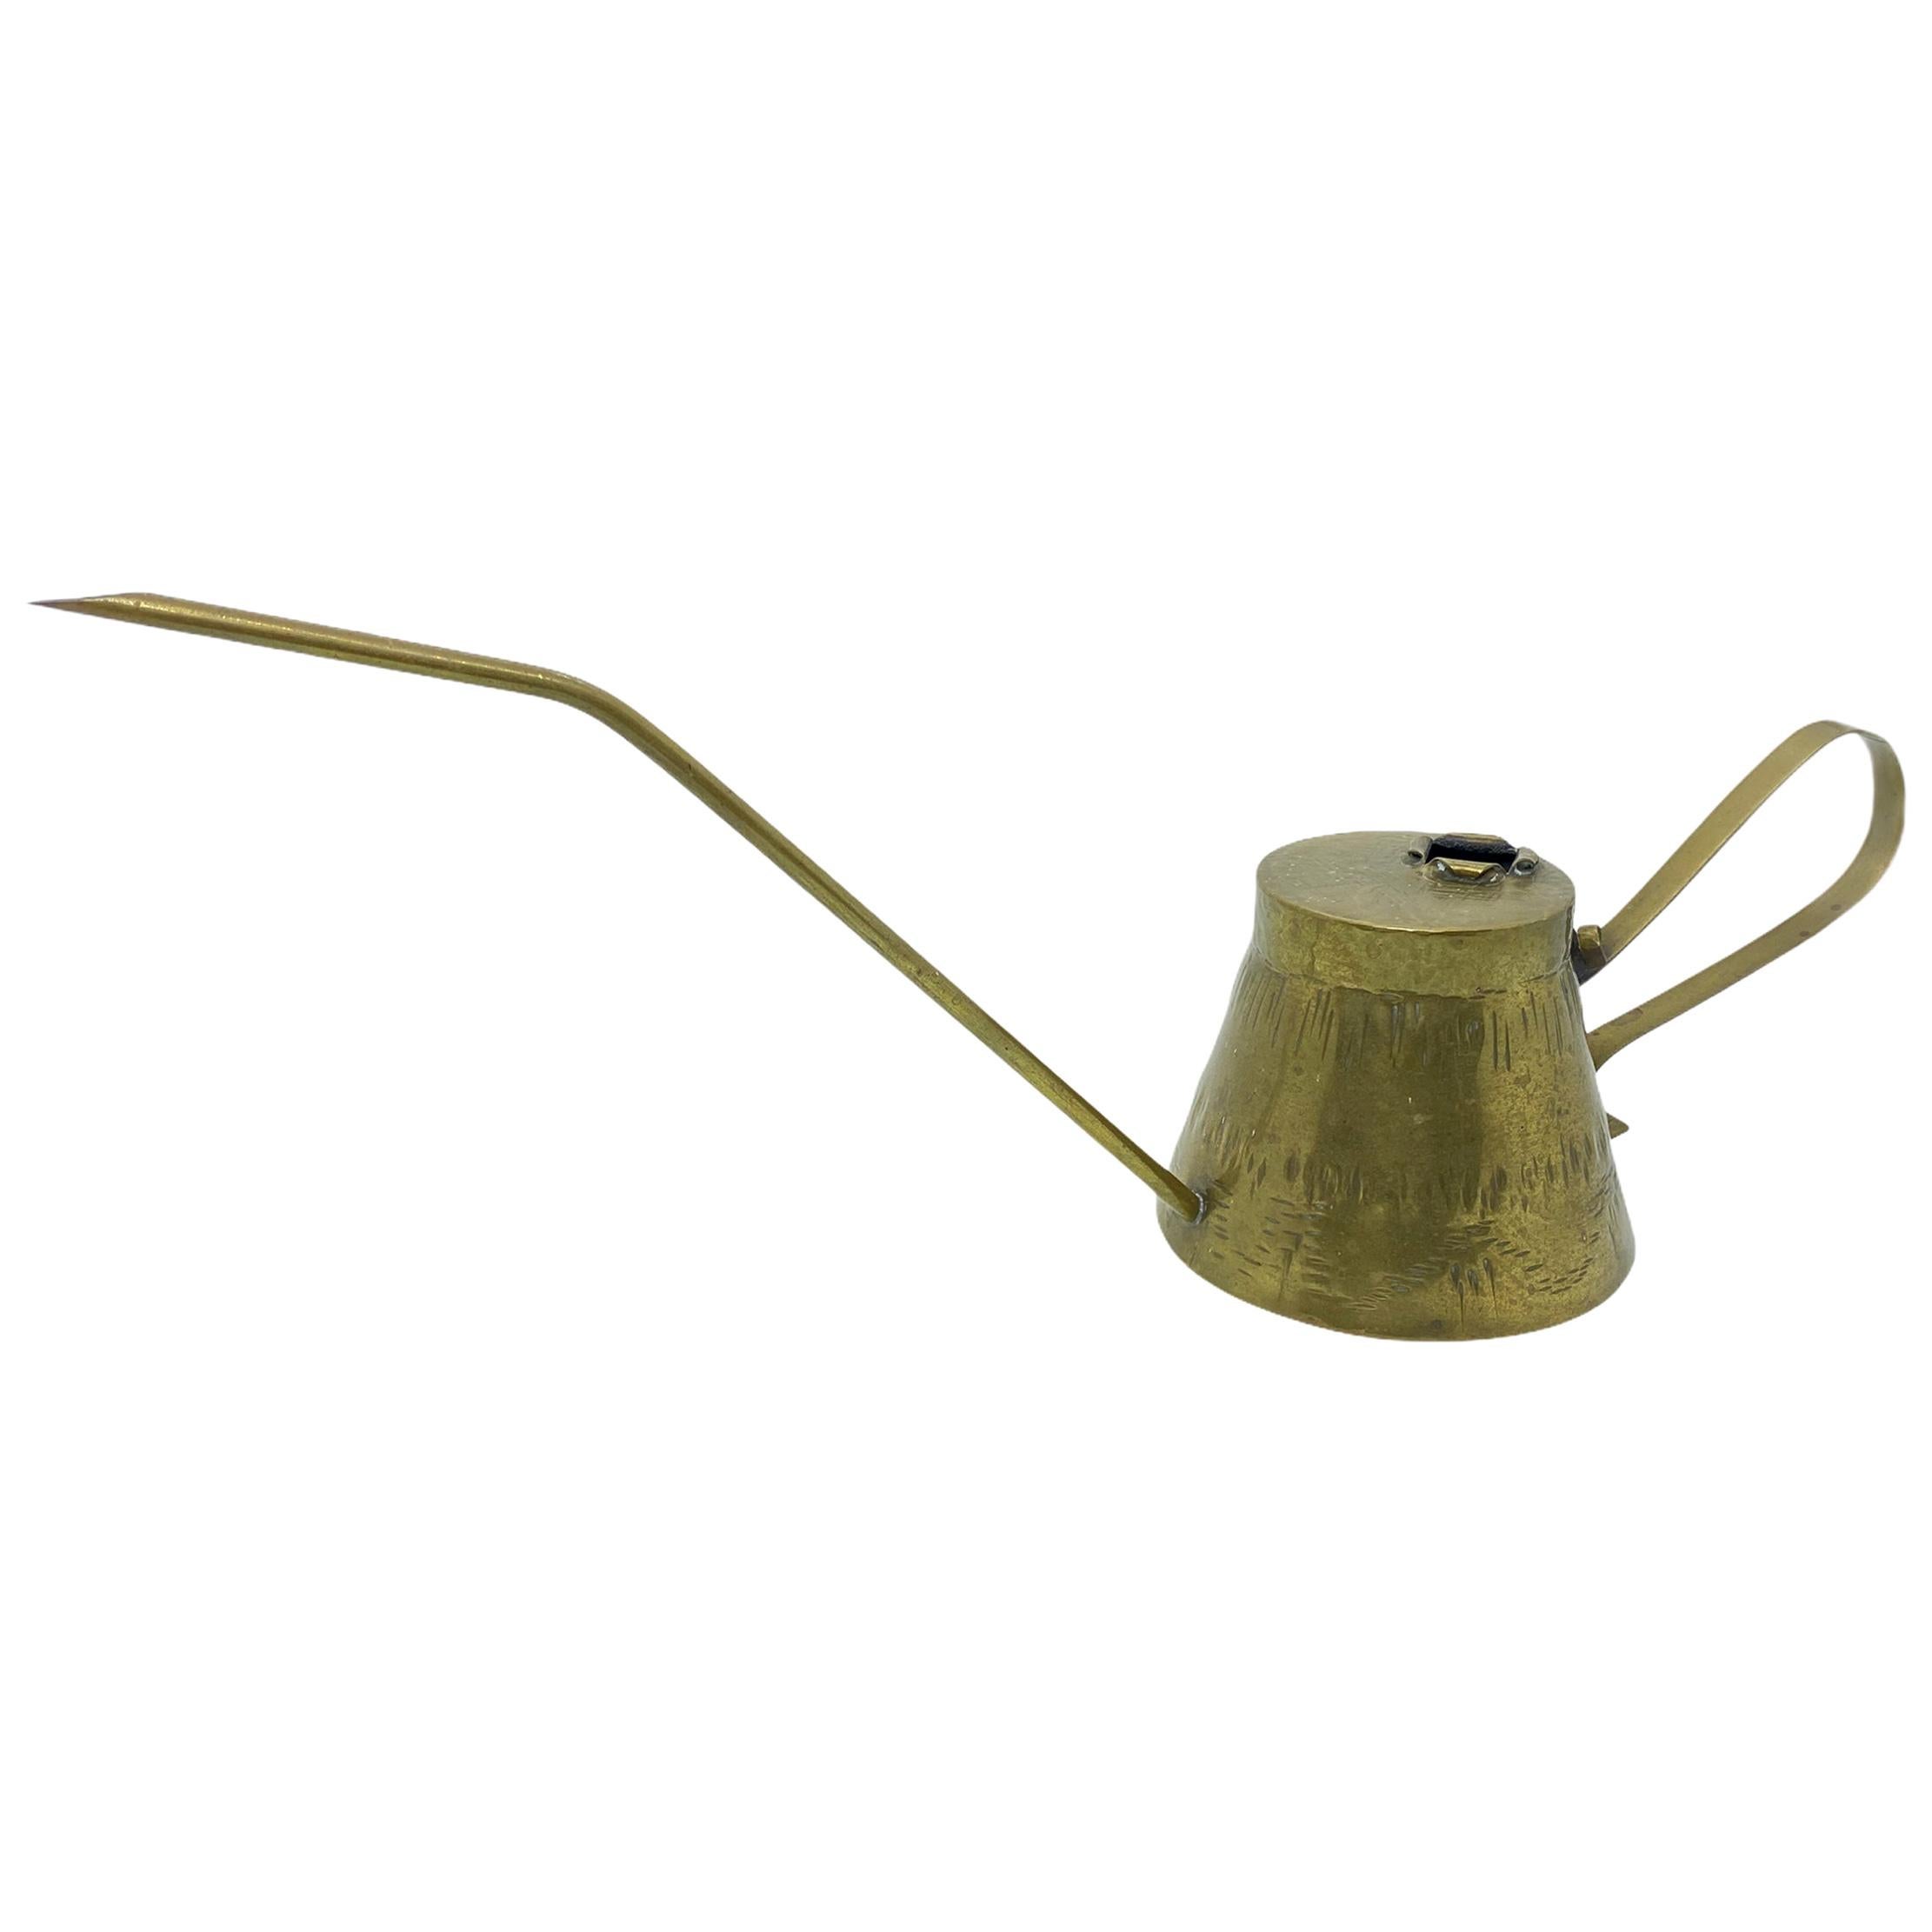 Vintage Mid-Century Modern Brass Bonsai Watering Can with Long Spout, 1960s